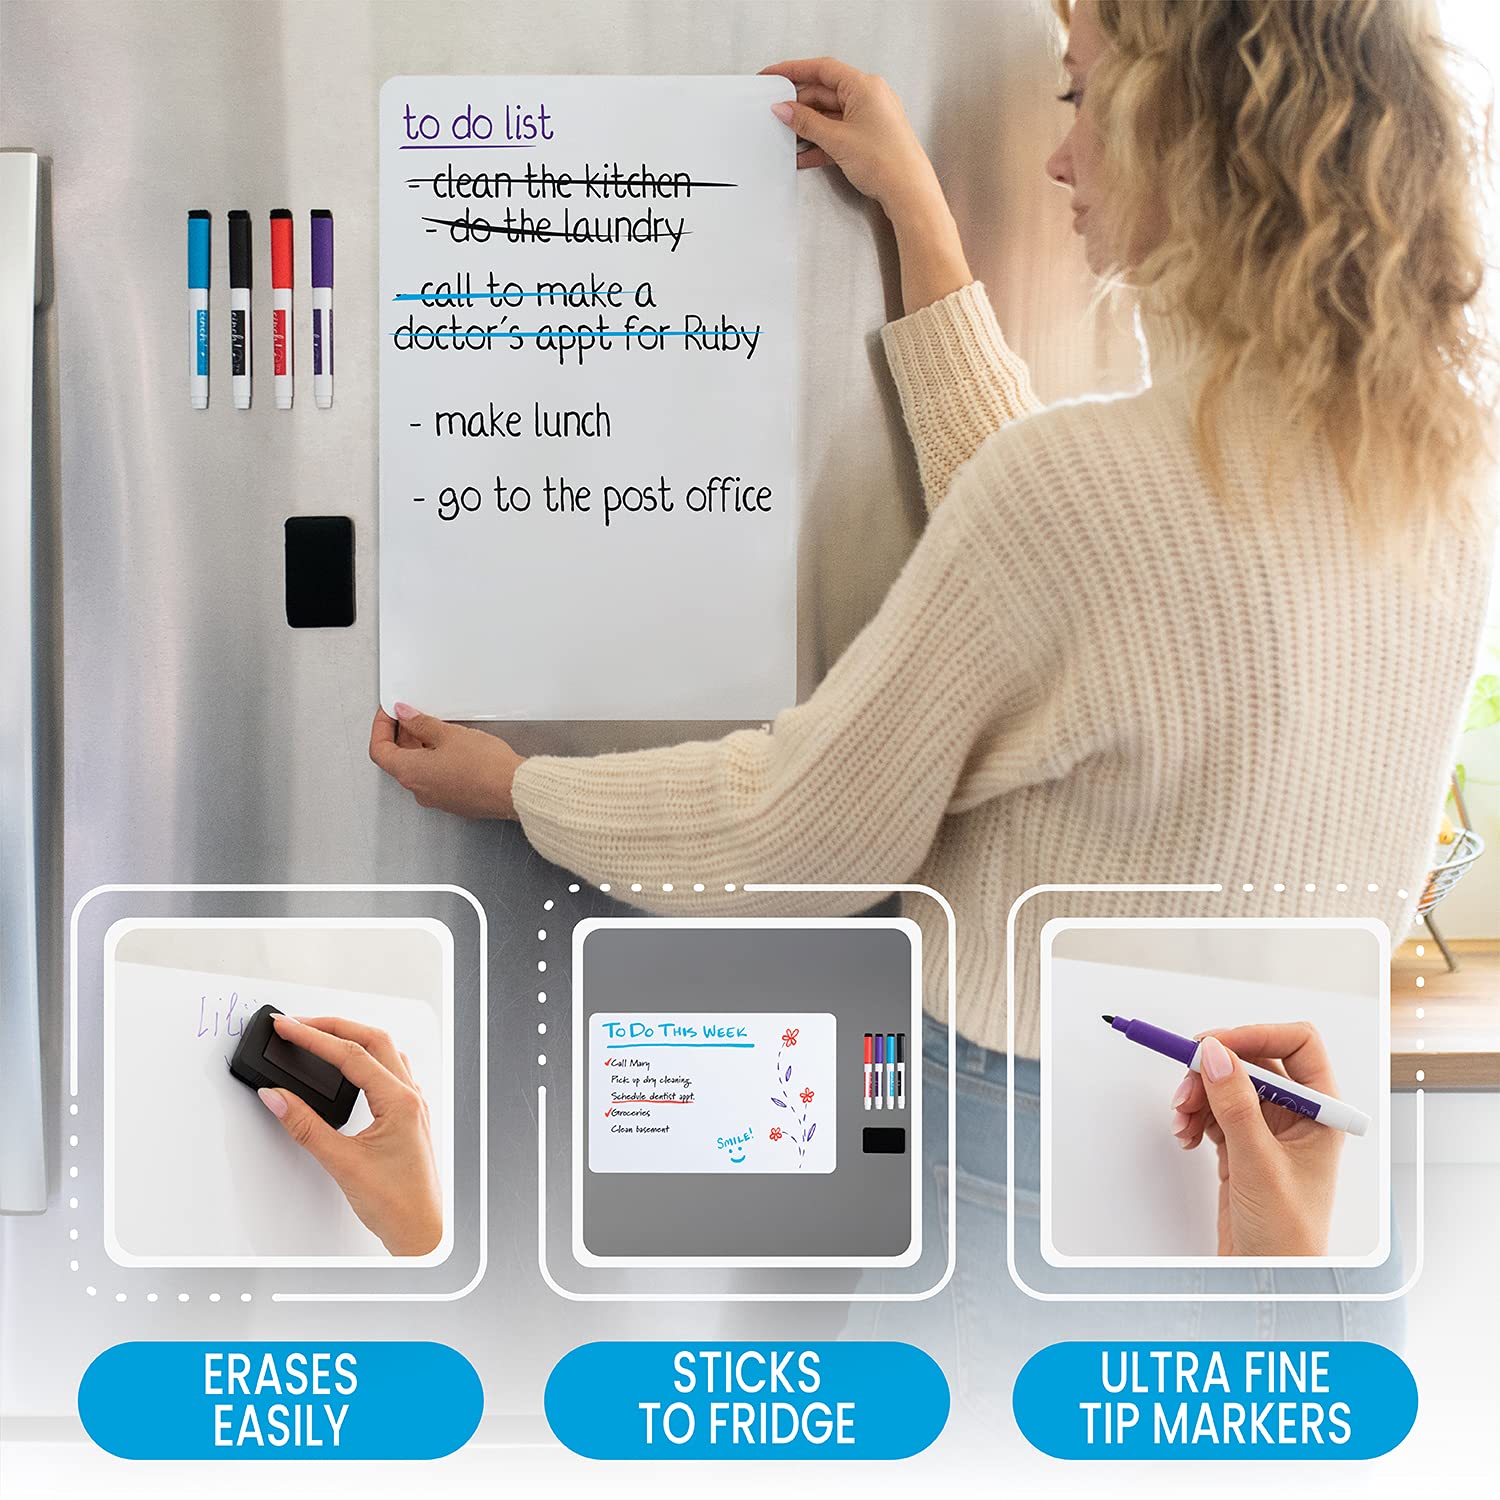 20x13 Stain-Resistant Magnetic Whiteboard for Fridge - Includes 4 Markers and Big Eraser with Magnets - Magnetic Dry Erase Board | Refrigerator White Board Organizer and Planner  - Like New